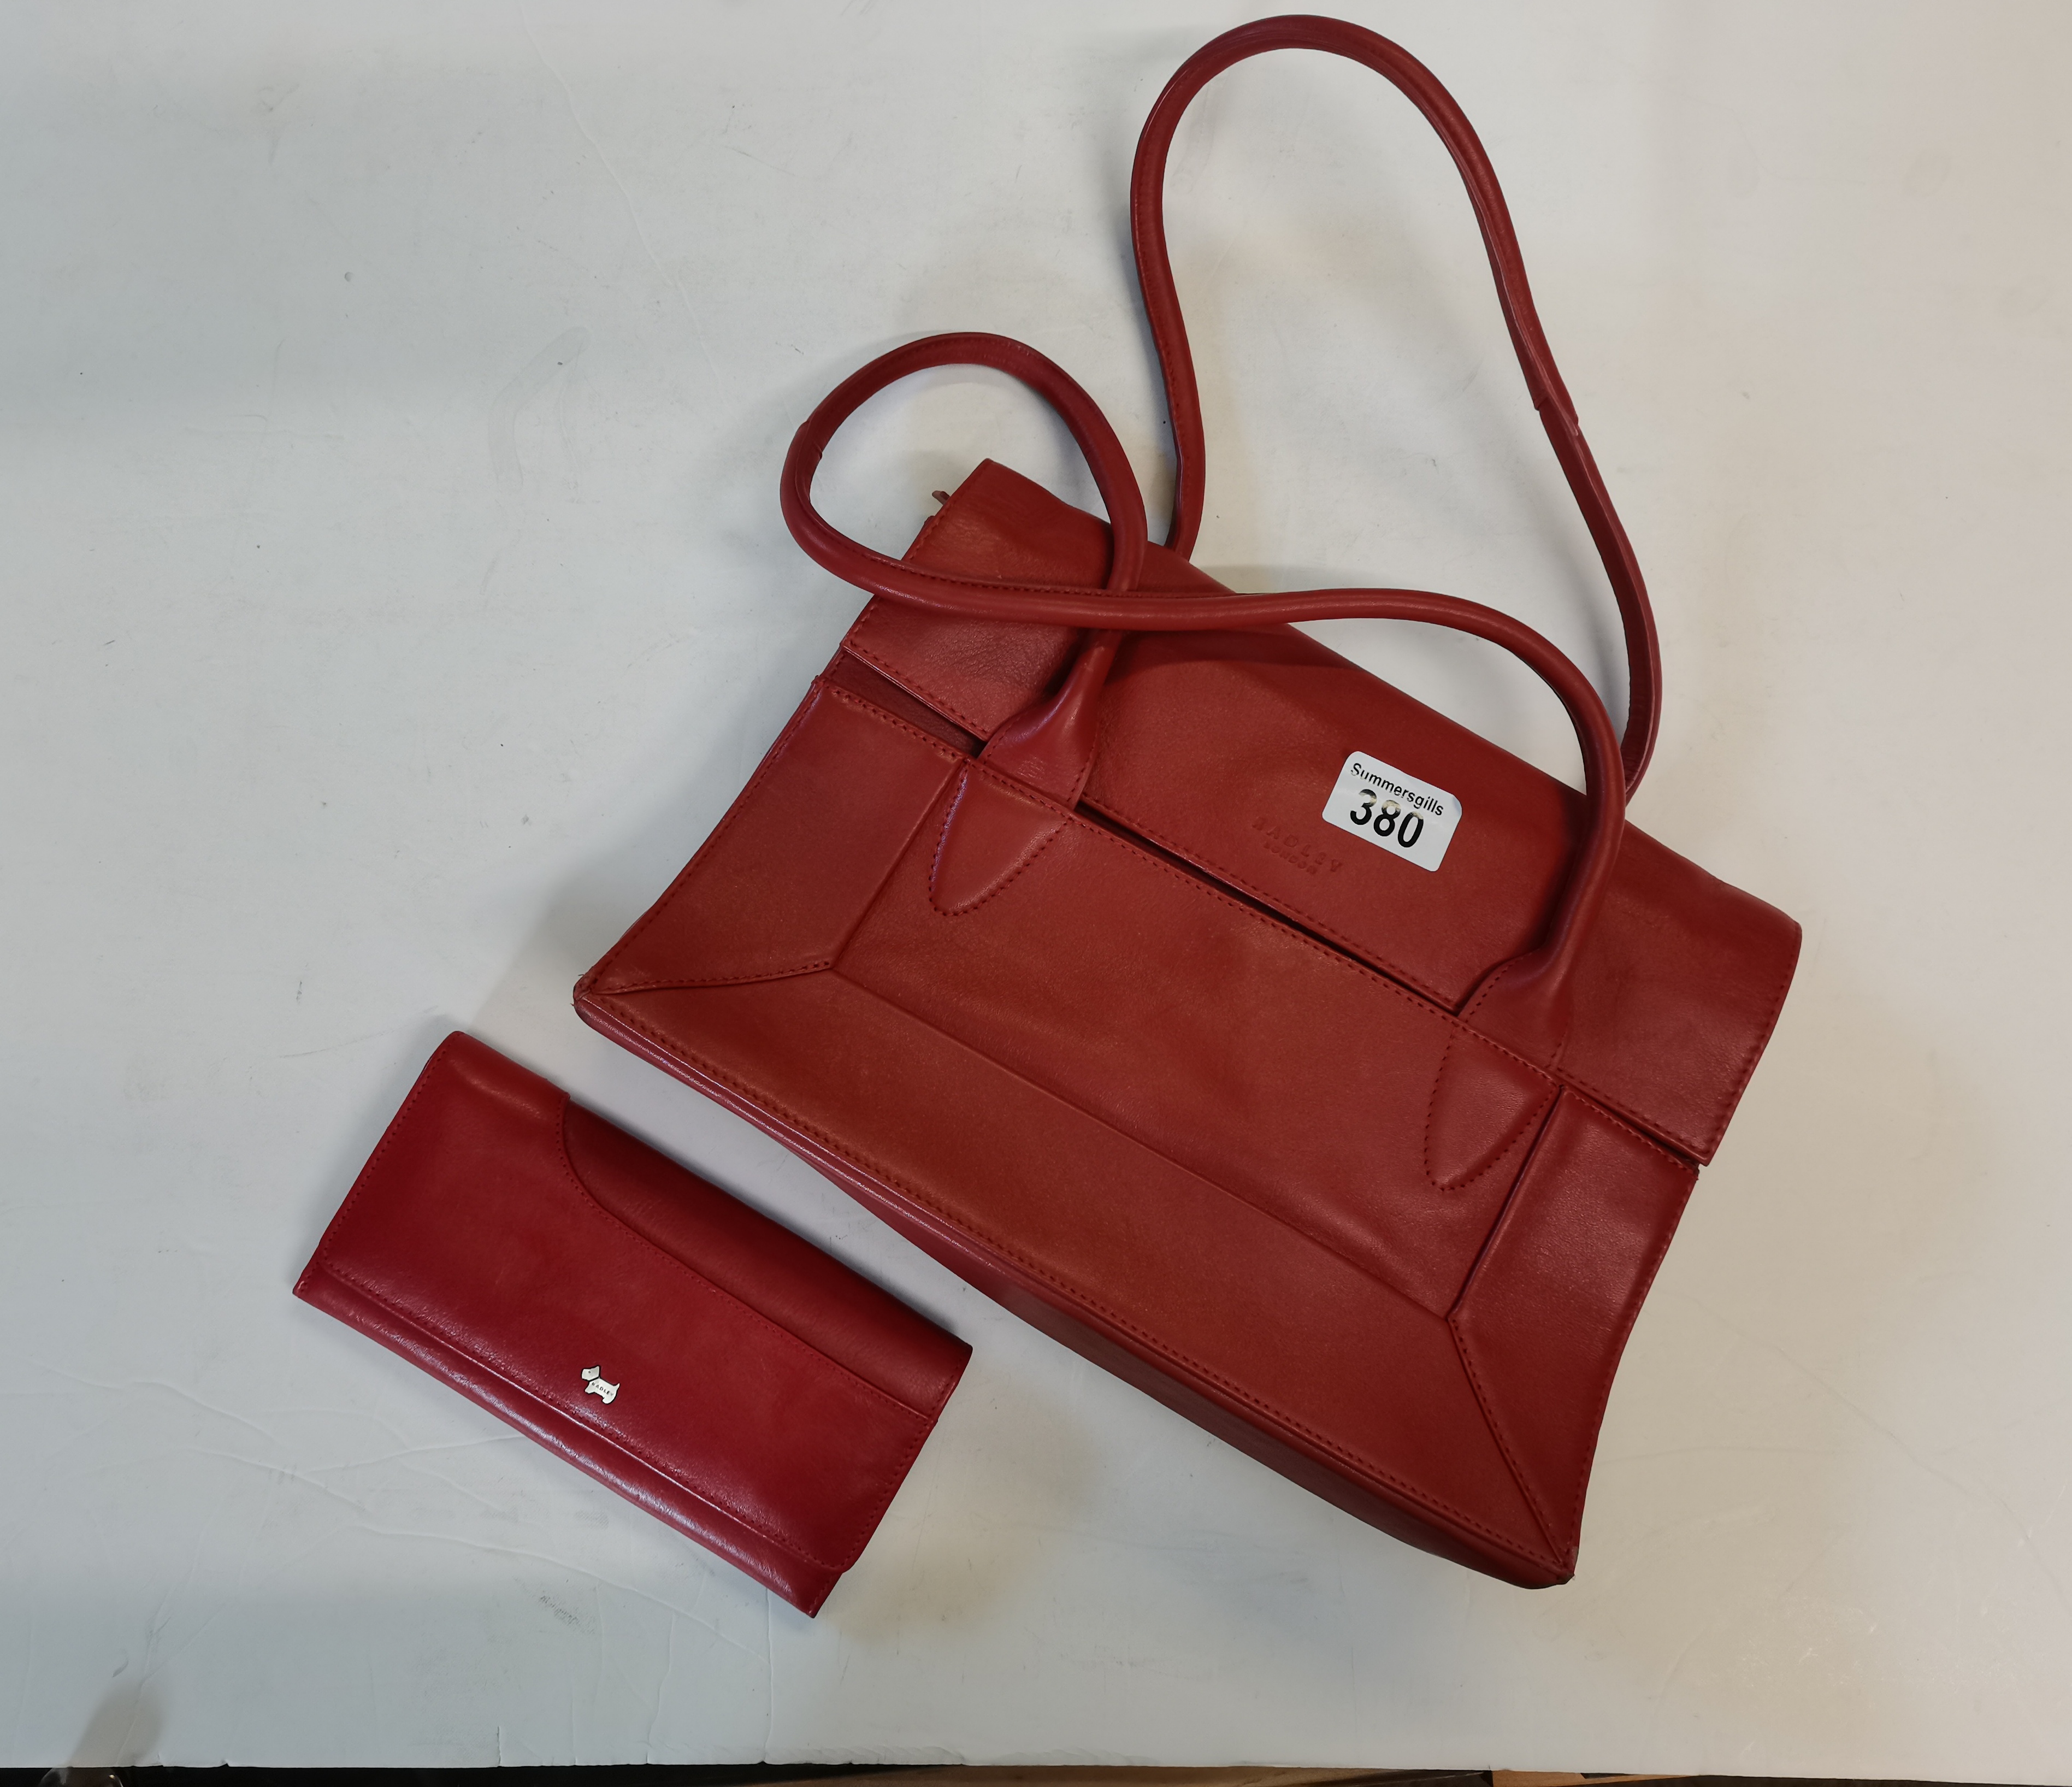 Rust Red Radley handbag with dust bag and purse - Image 2 of 2